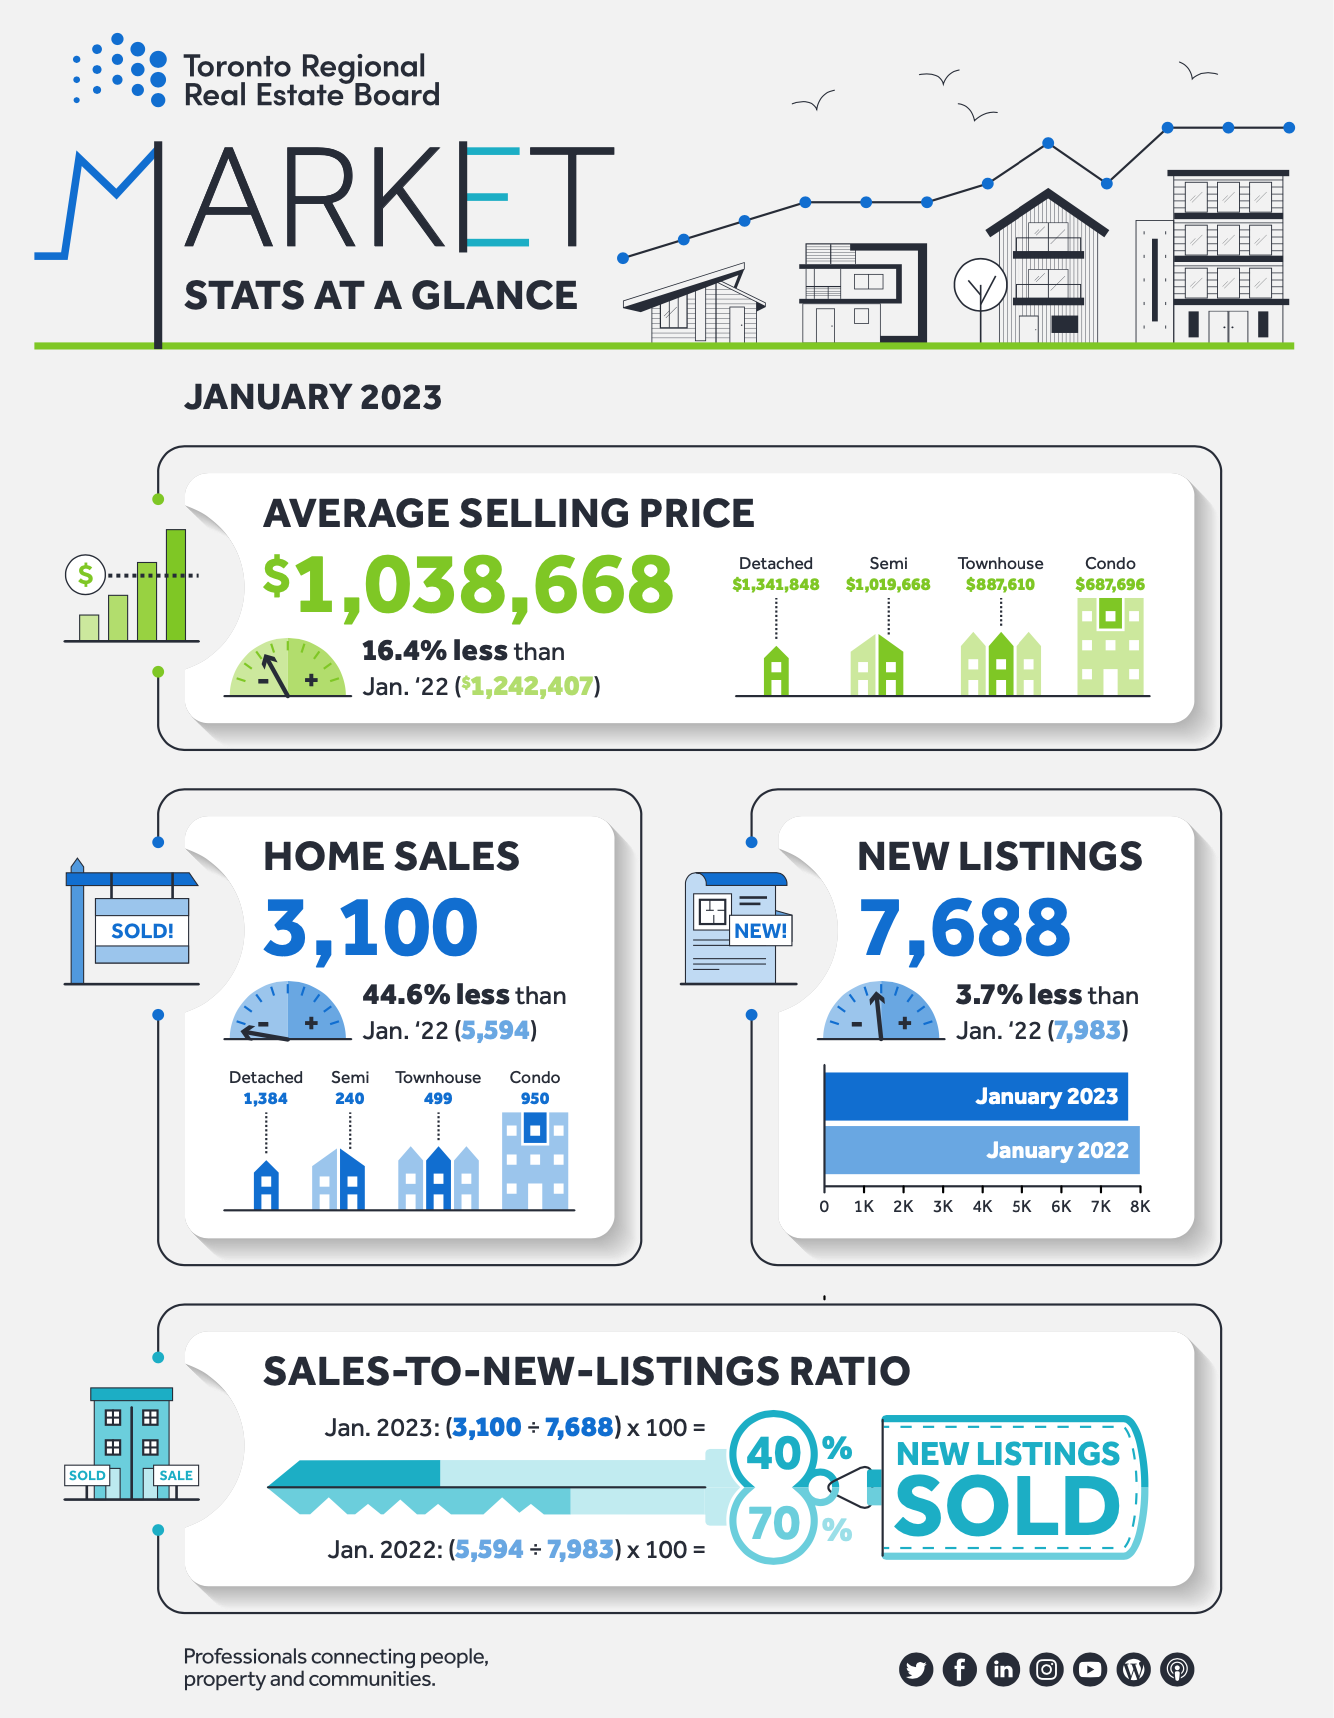 Toronto Region Real Estate Board Market Stats At A Glance for January 2023